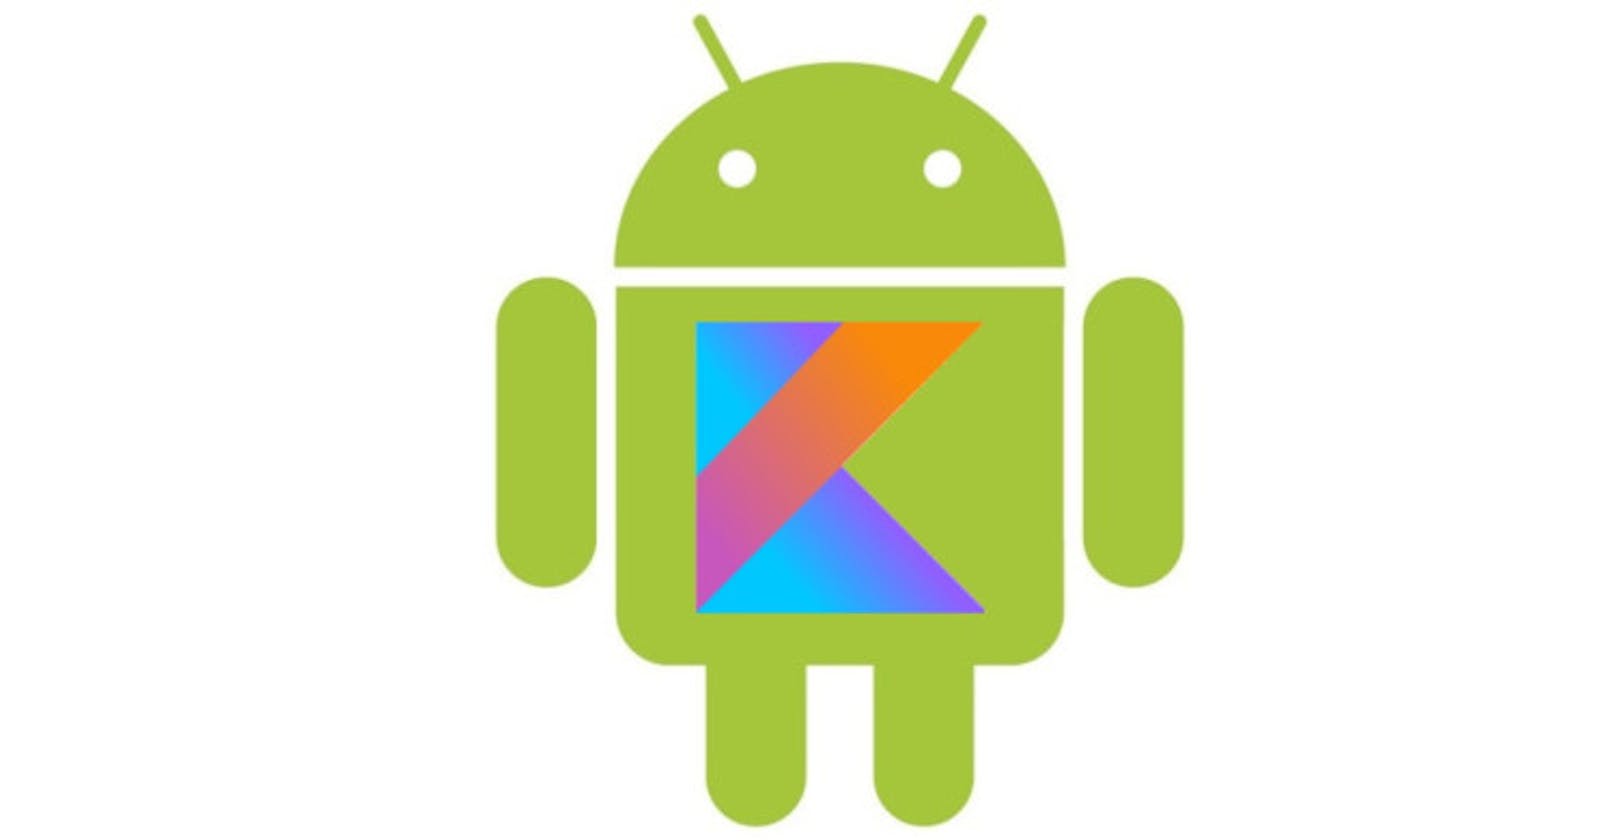 Android now supports the Kotlin programming language